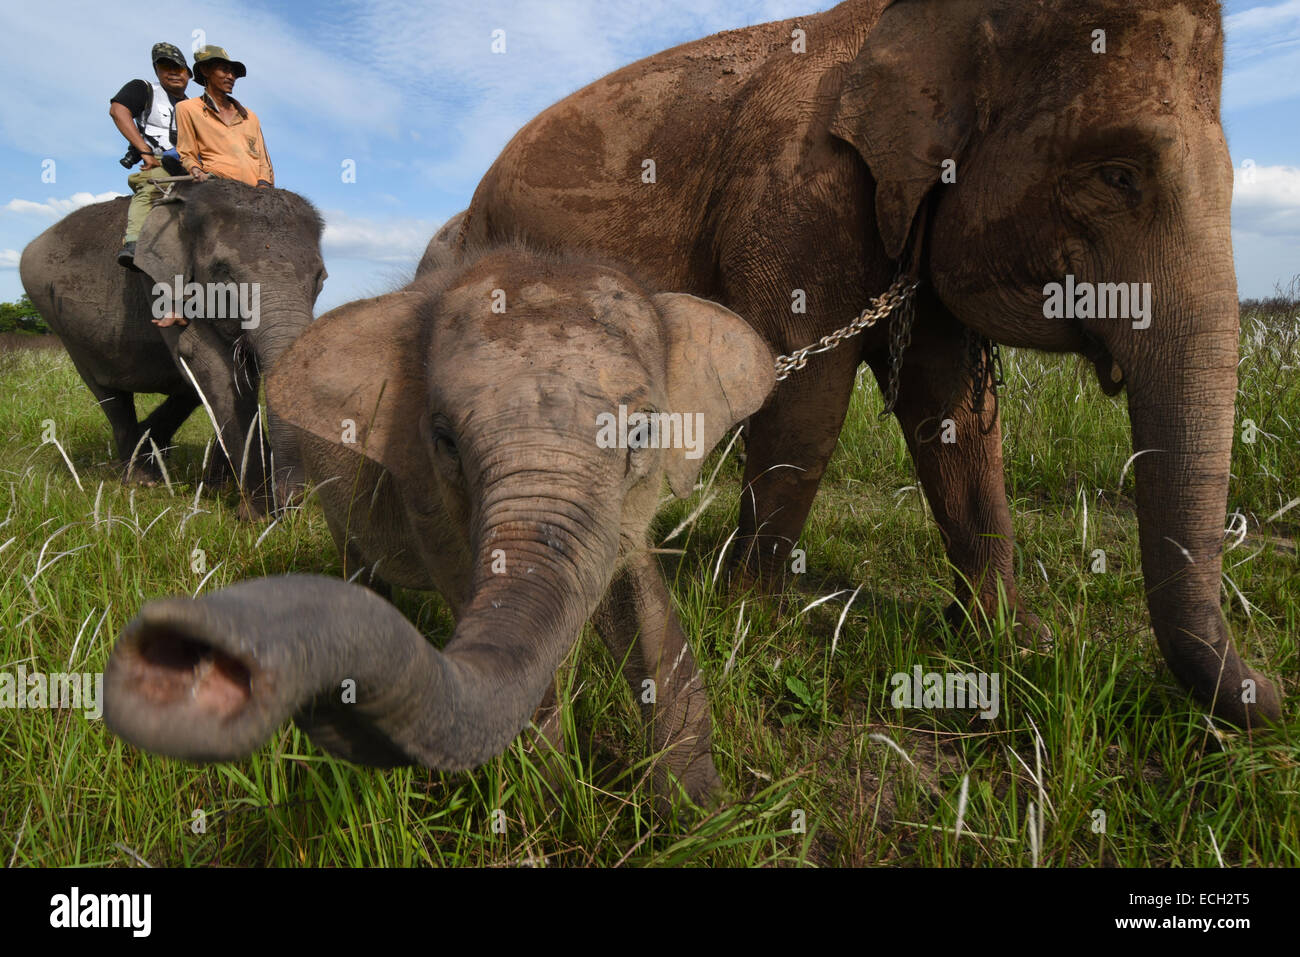 A baby elephant trying to kiss a photographer's lens in Way Kambas National Park, Sumatra, Indonesia. Stock Photo